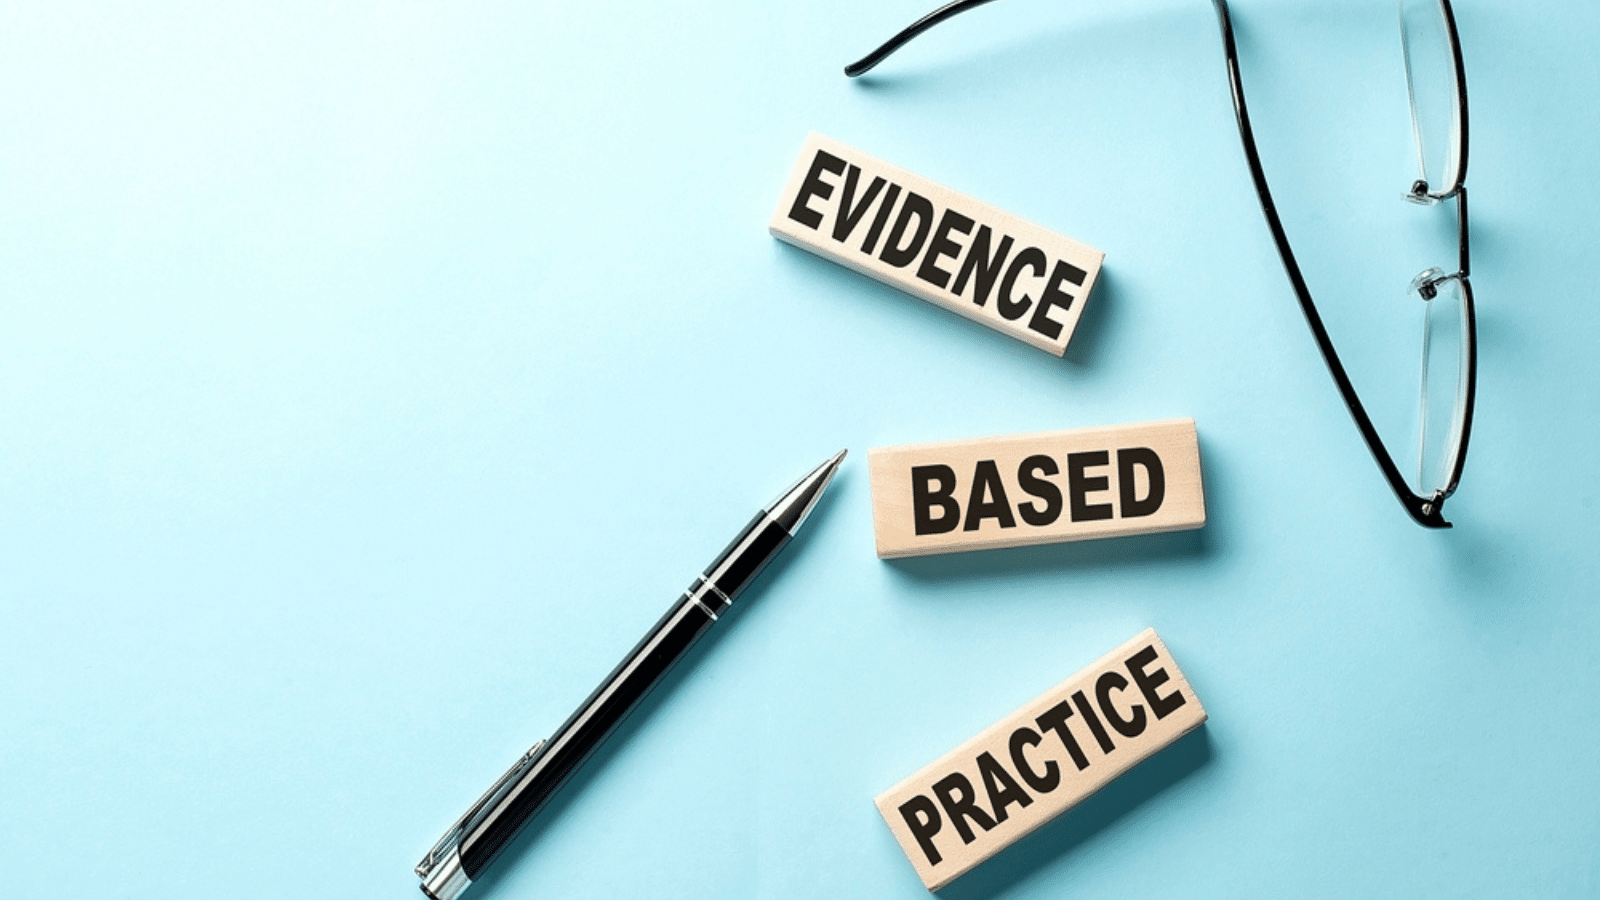 <p><span>Teaching children to seek evidence and base their beliefs on facts rather than faith helps develop a rational mindset. This approach prepares them for real-world problem-solving, where evidence-based decisions are crucial. It also helps in distinguishing between reliable and unreliable sources of information.</span></p>